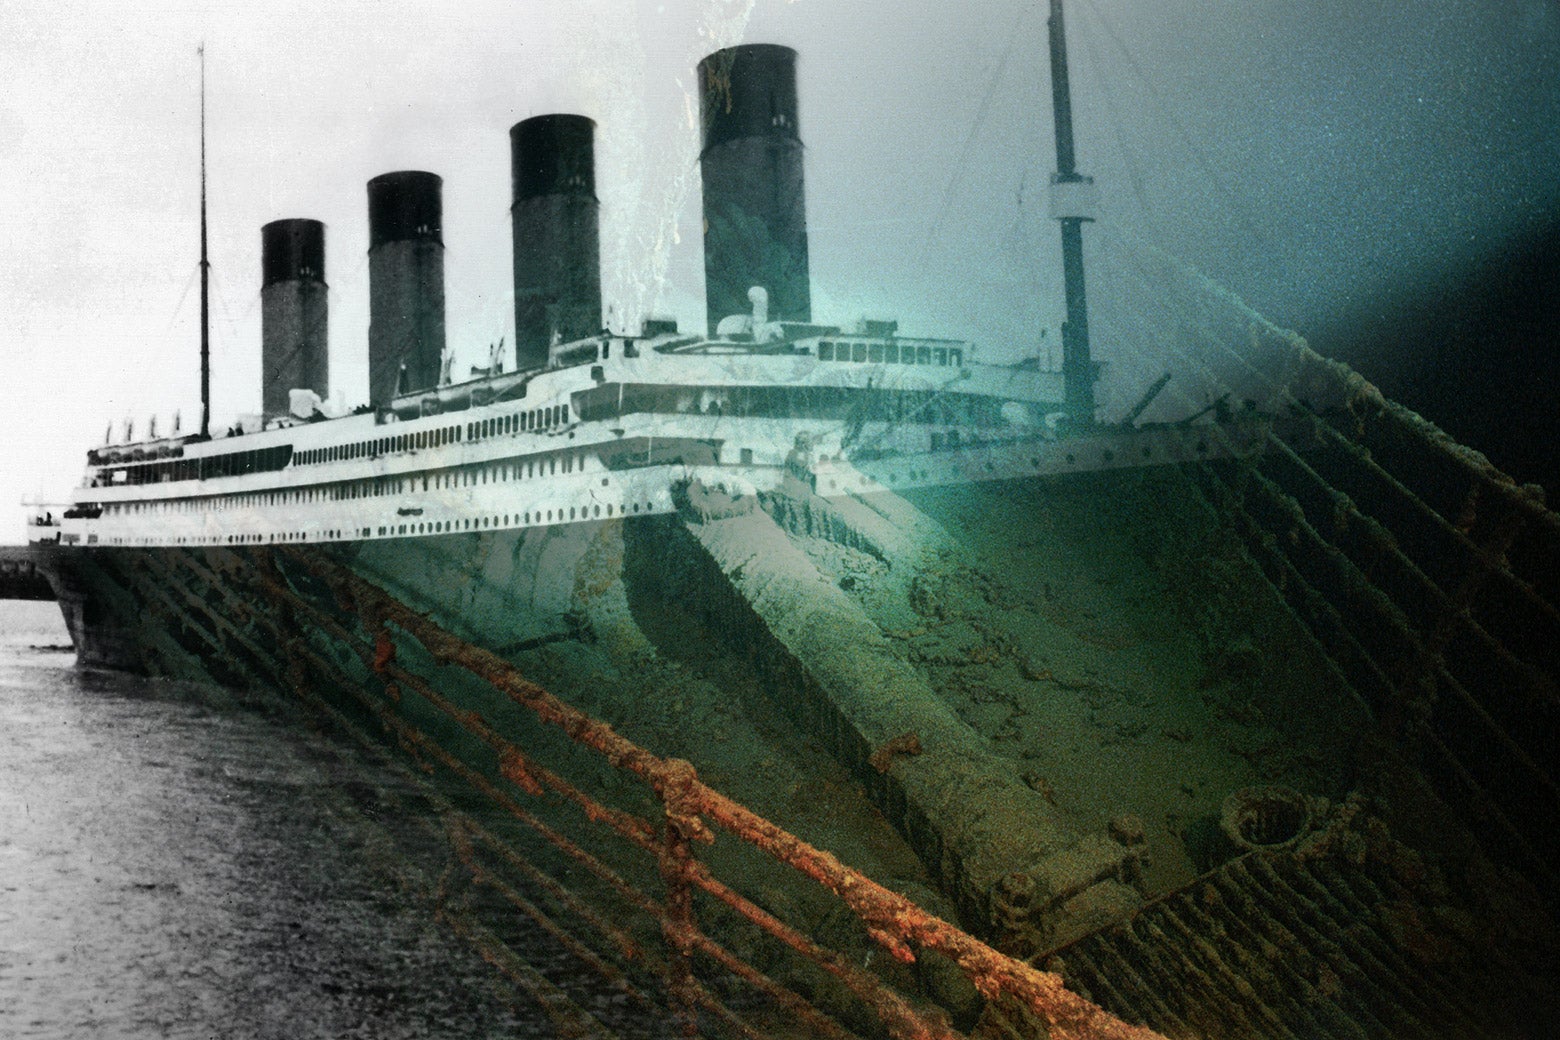 A photo illustration combining an archival image of the Titanic and an image of its remains on the ocean floor.